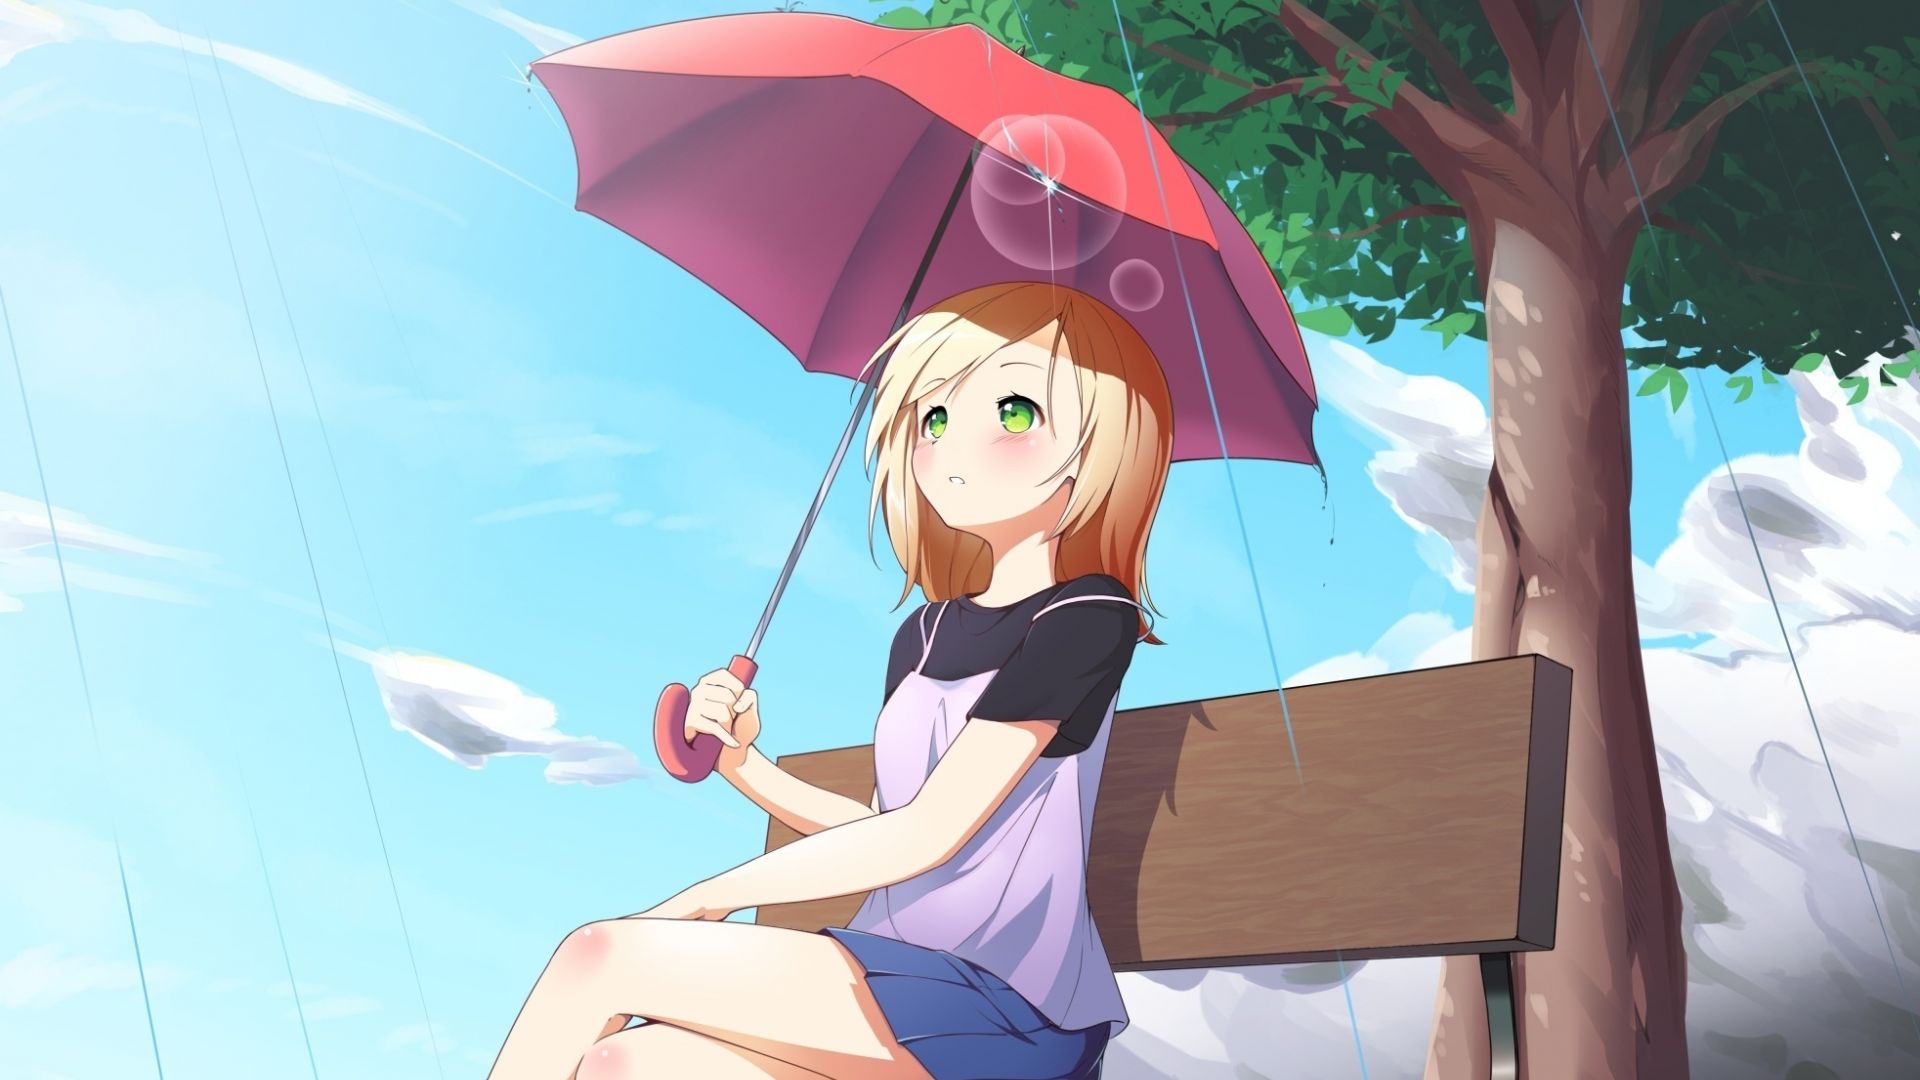 Anime Sunny Day Wallpapers - Wallpaper Cave